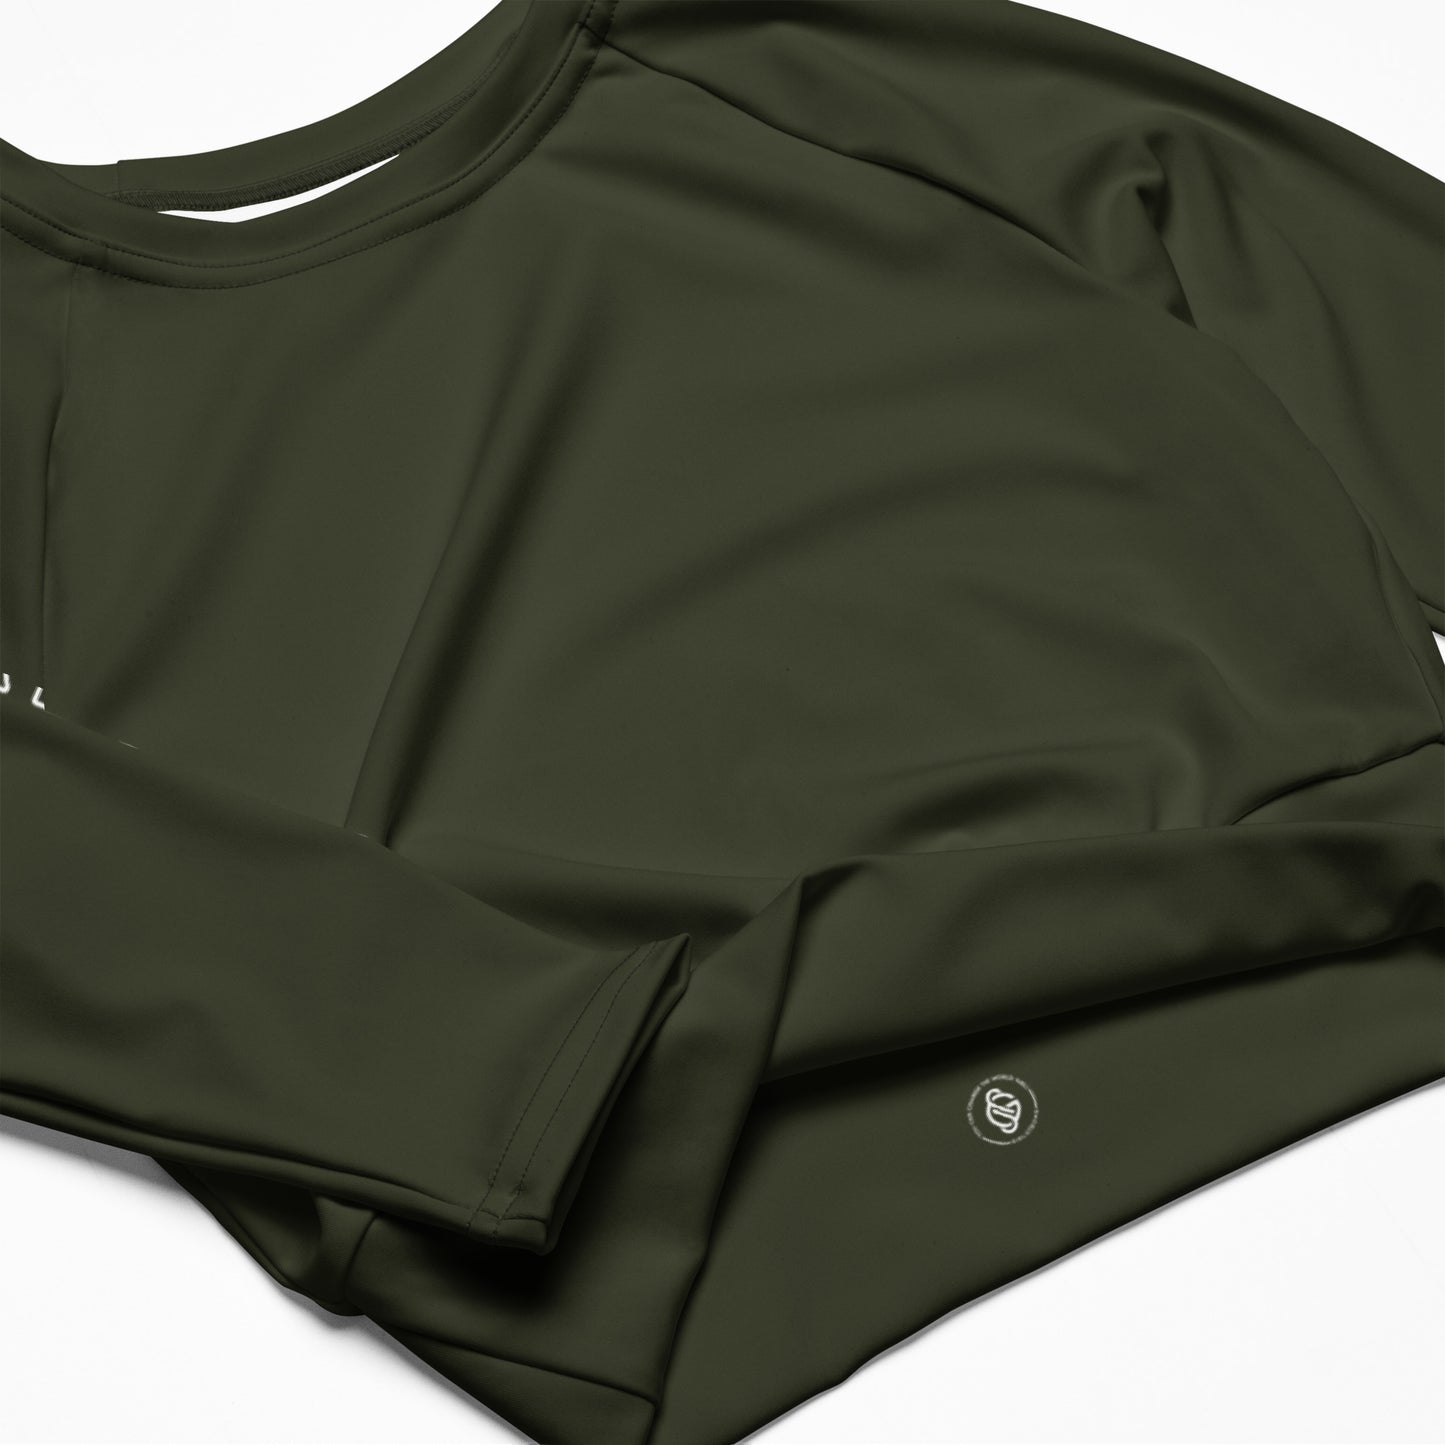 THE ESSENTIAL LONG SLEEVE FITTED CROP TOP OLIVE